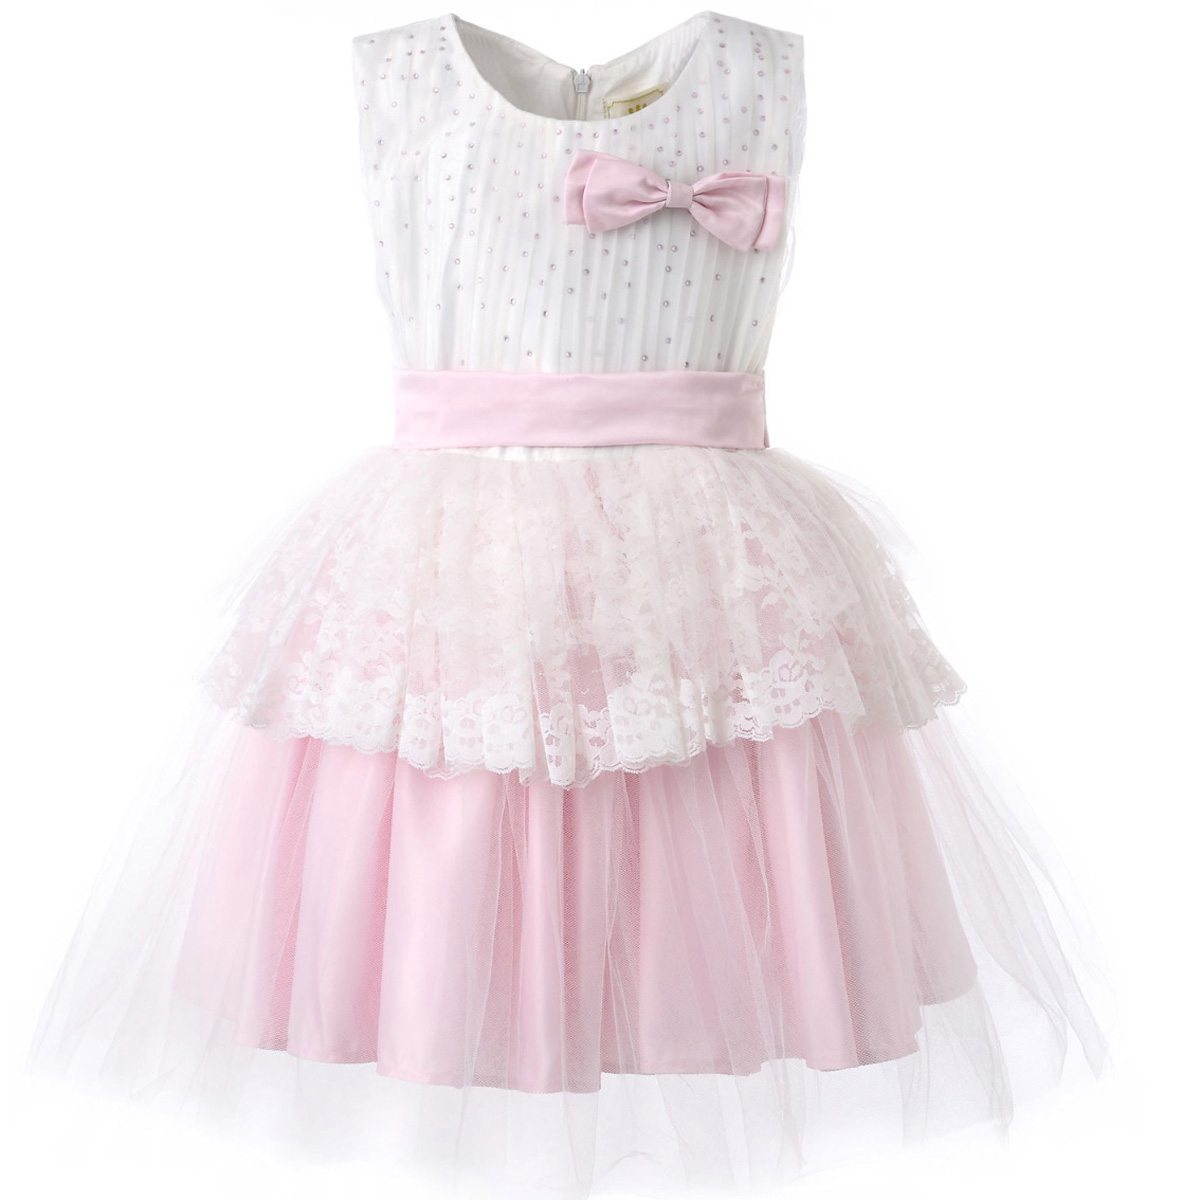 Hanakimi® Girl White Pink Holiday Party Dresses